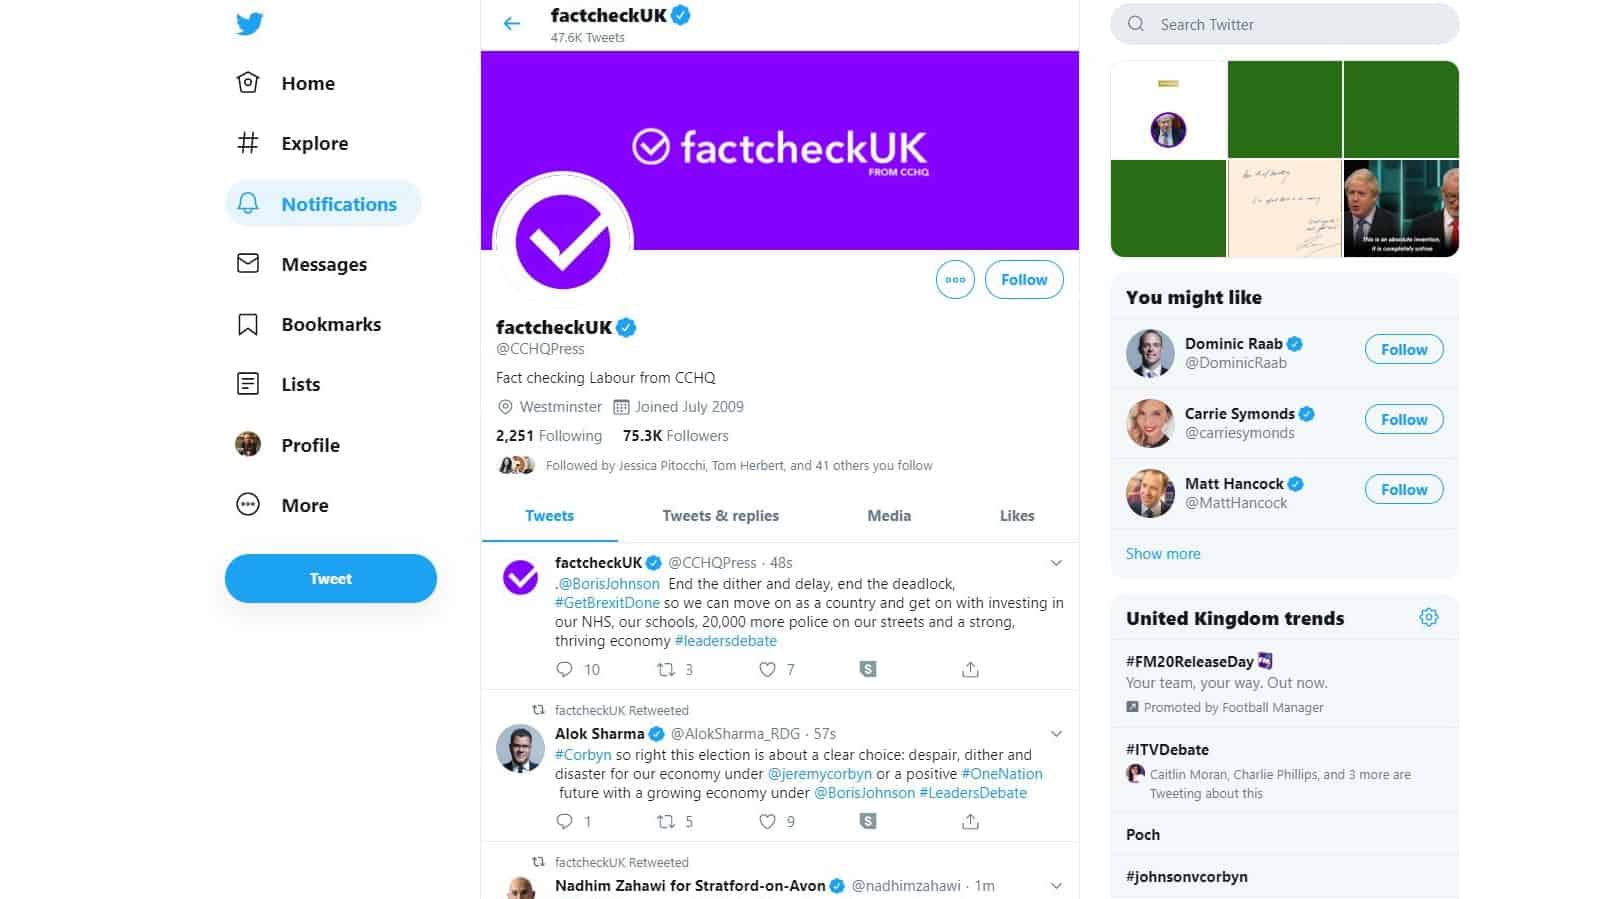 PR firm behind FactcheckUK stunt handed £3 million government contract uncontested